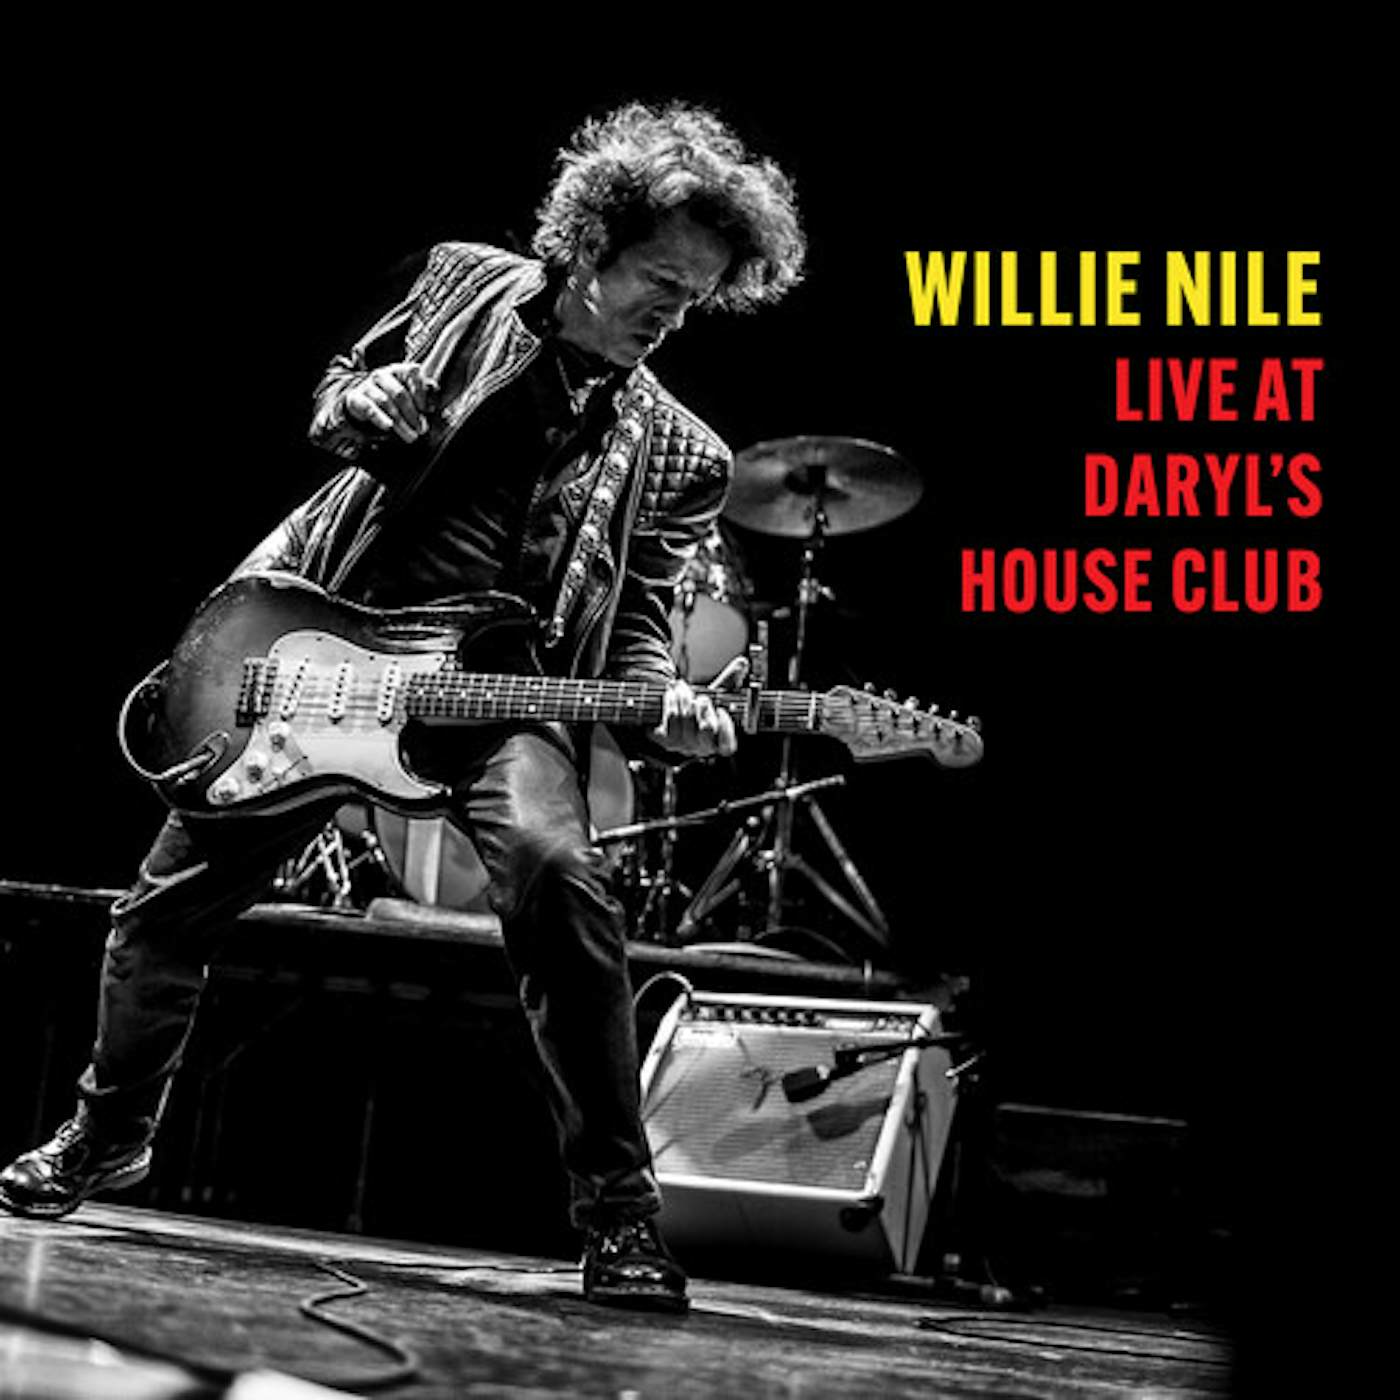 Willie Nile LIVE AT DARYL'S HOUSE CLUB CD